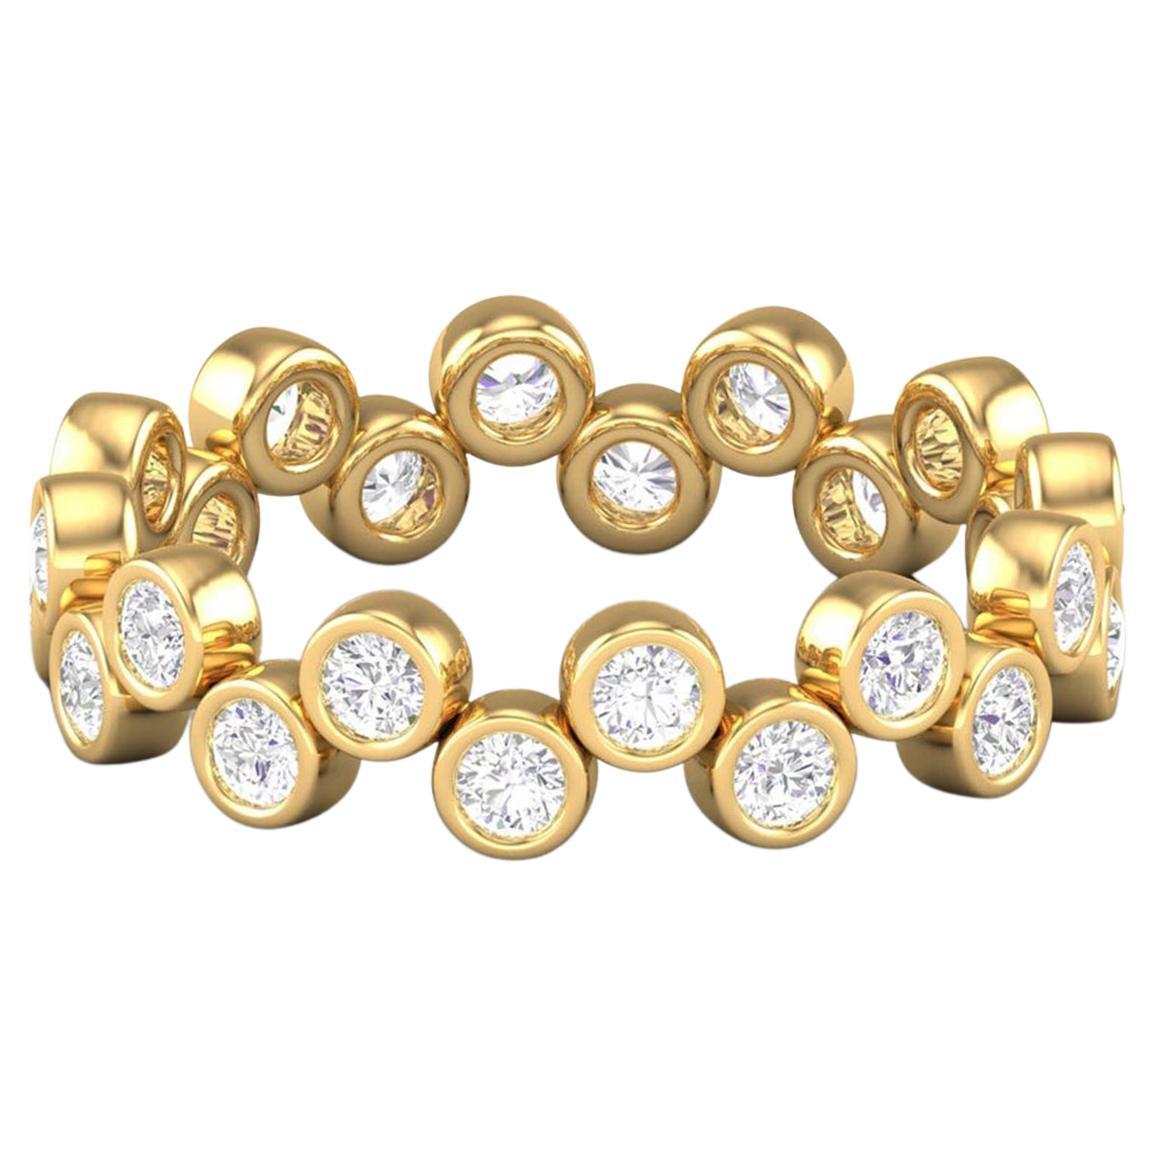 Item details:-

✦ SKU:- JRG00256YYY

✦ Product Specification:-
• Gold Kt: 14K (also available in 18K)
• Available Gold Color: Rose Gold, Yellow Gold, White Gold
• Round Moissanite: 24 pcs 2.00MM
• Total CTW: 0.70 ctw

If you have any additional